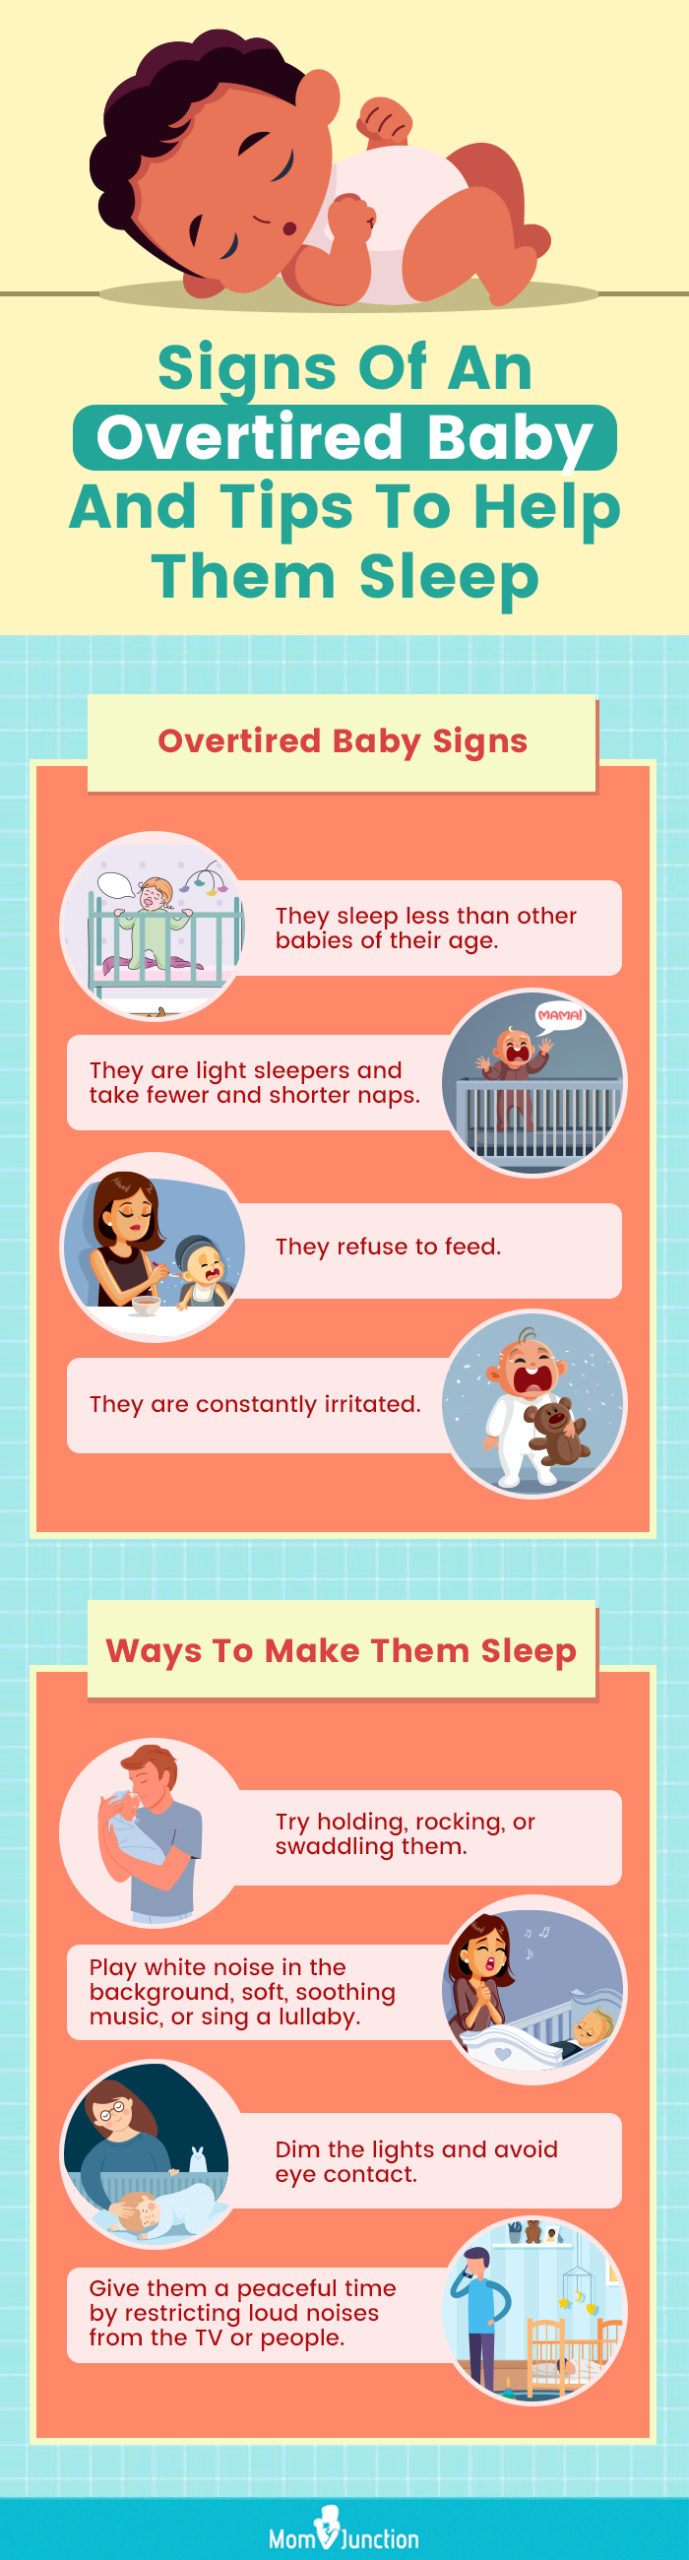 signs of an overtired baby and tips to help them sleep (infographic)